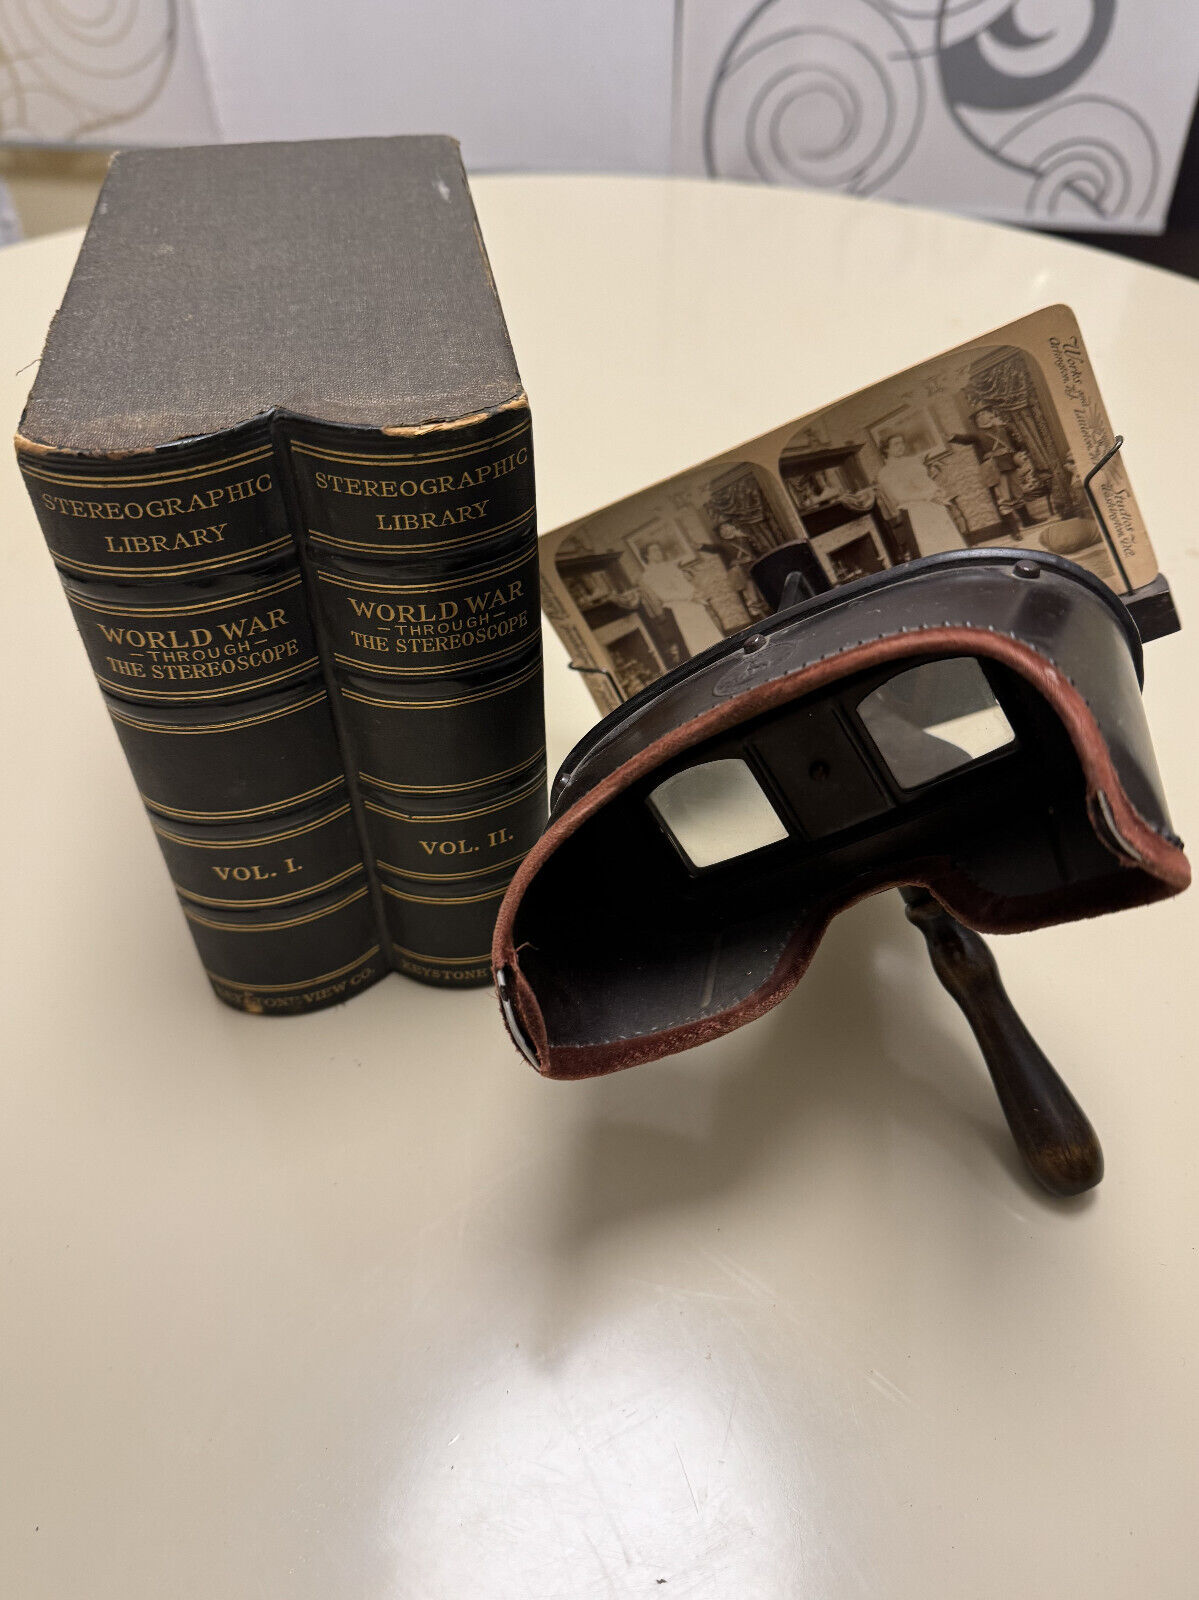 1920's Keystone View Co World War Through the Stereoscope Library *ANTIQUE*